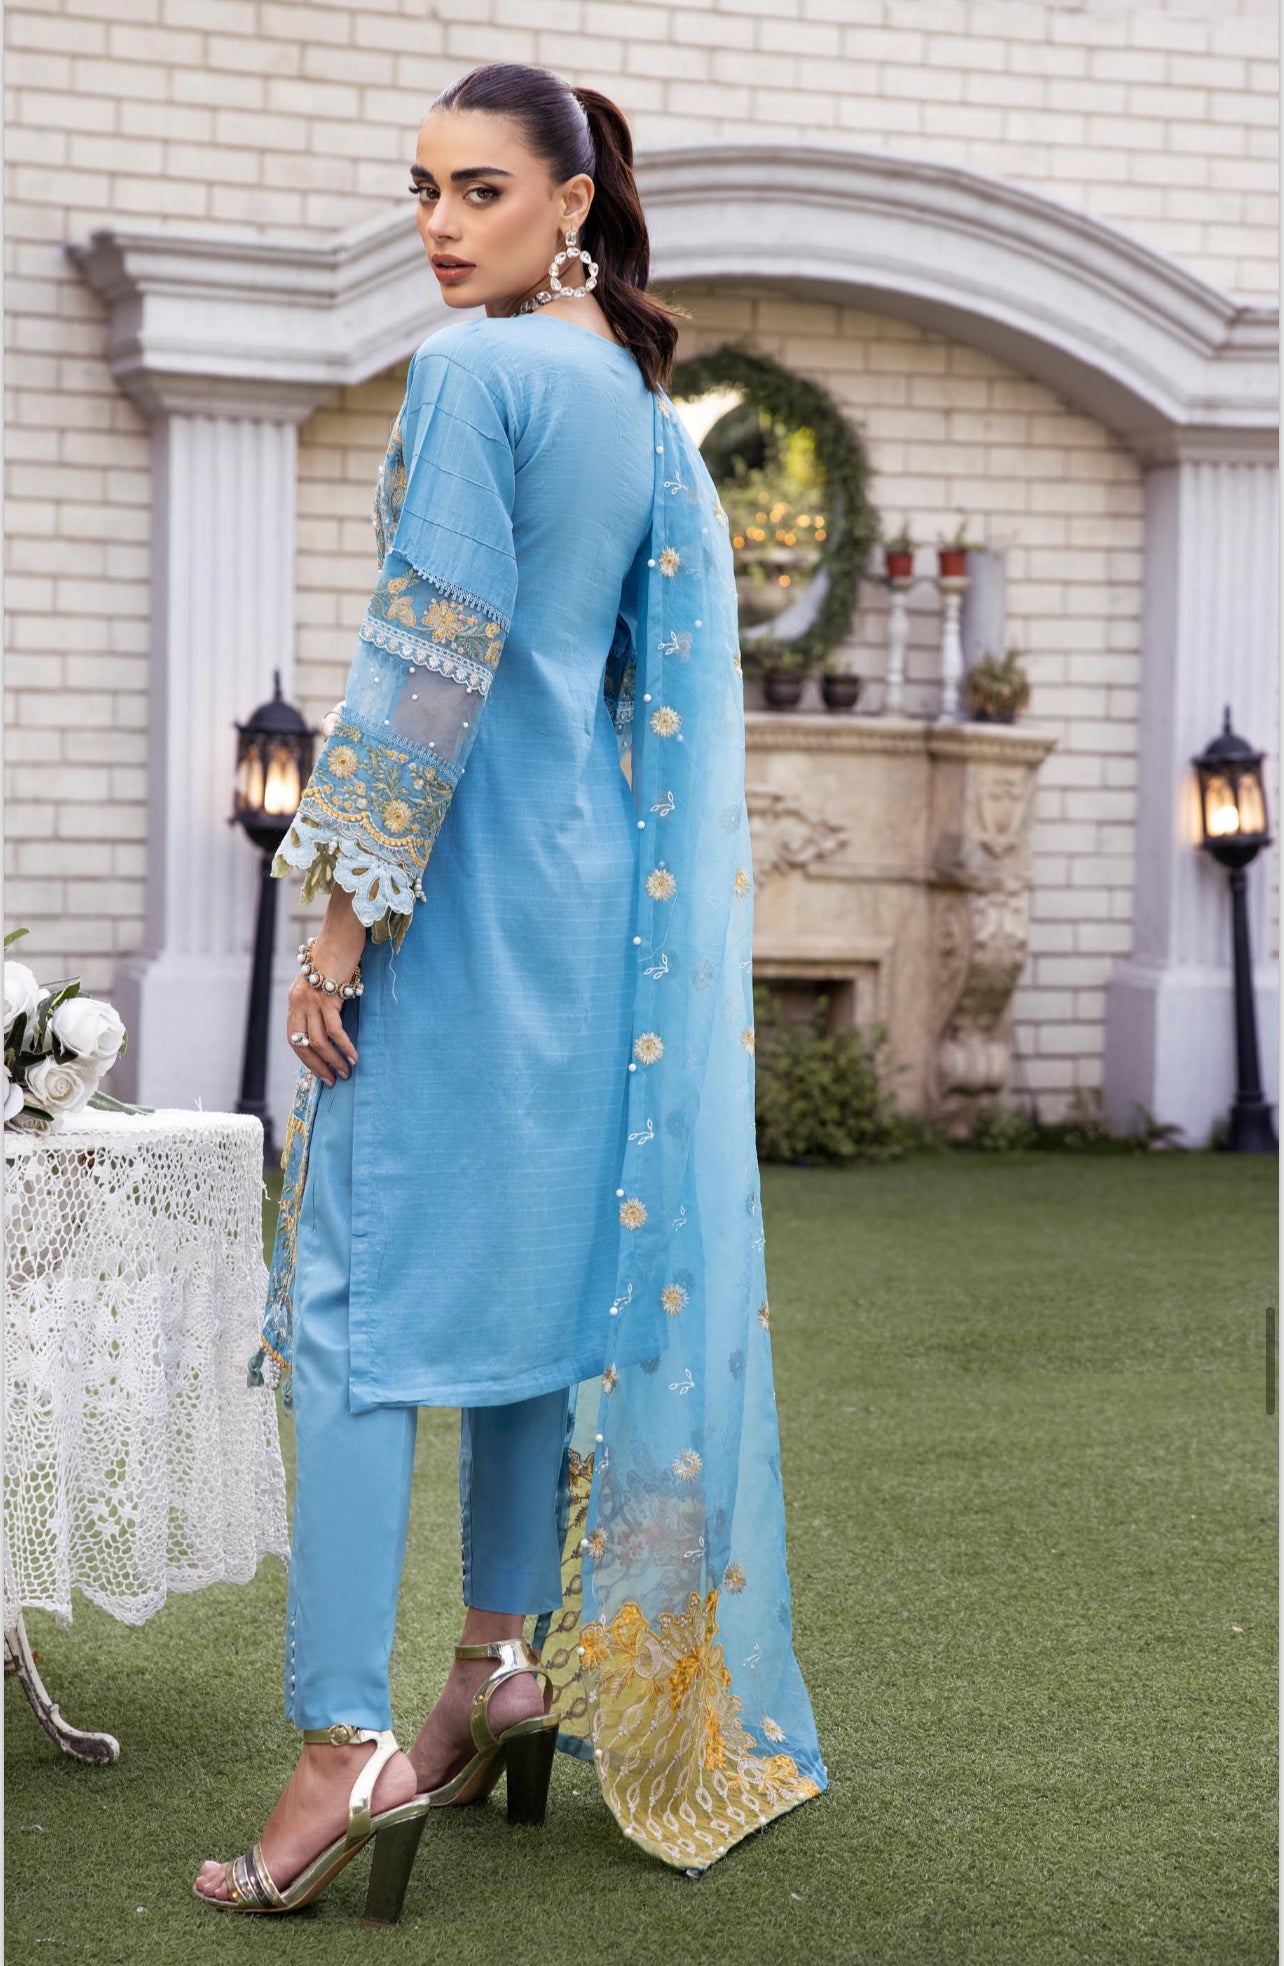 SIMRANS EID LUXURY JACQUARD LAWN MOTHER DAUGHTER:kids 3PC READYMADE SMD4536